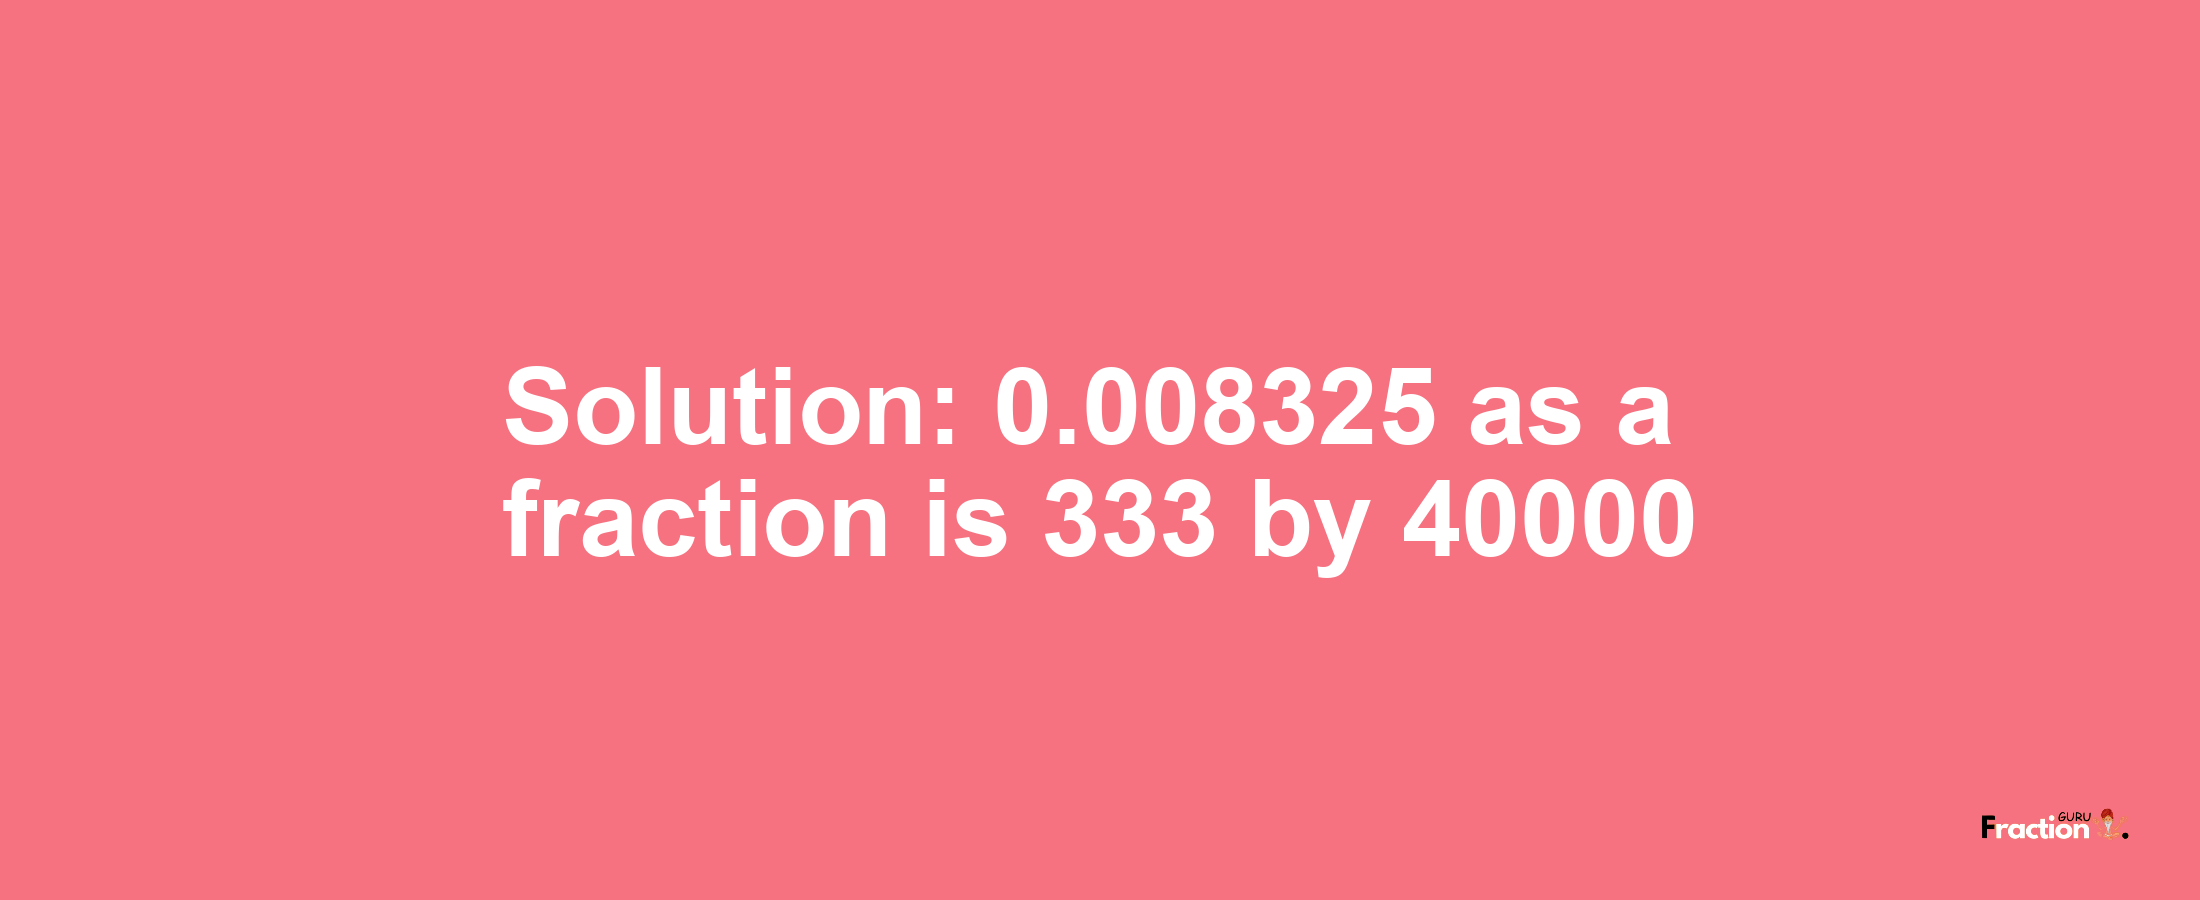 Solution:0.008325 as a fraction is 333/40000